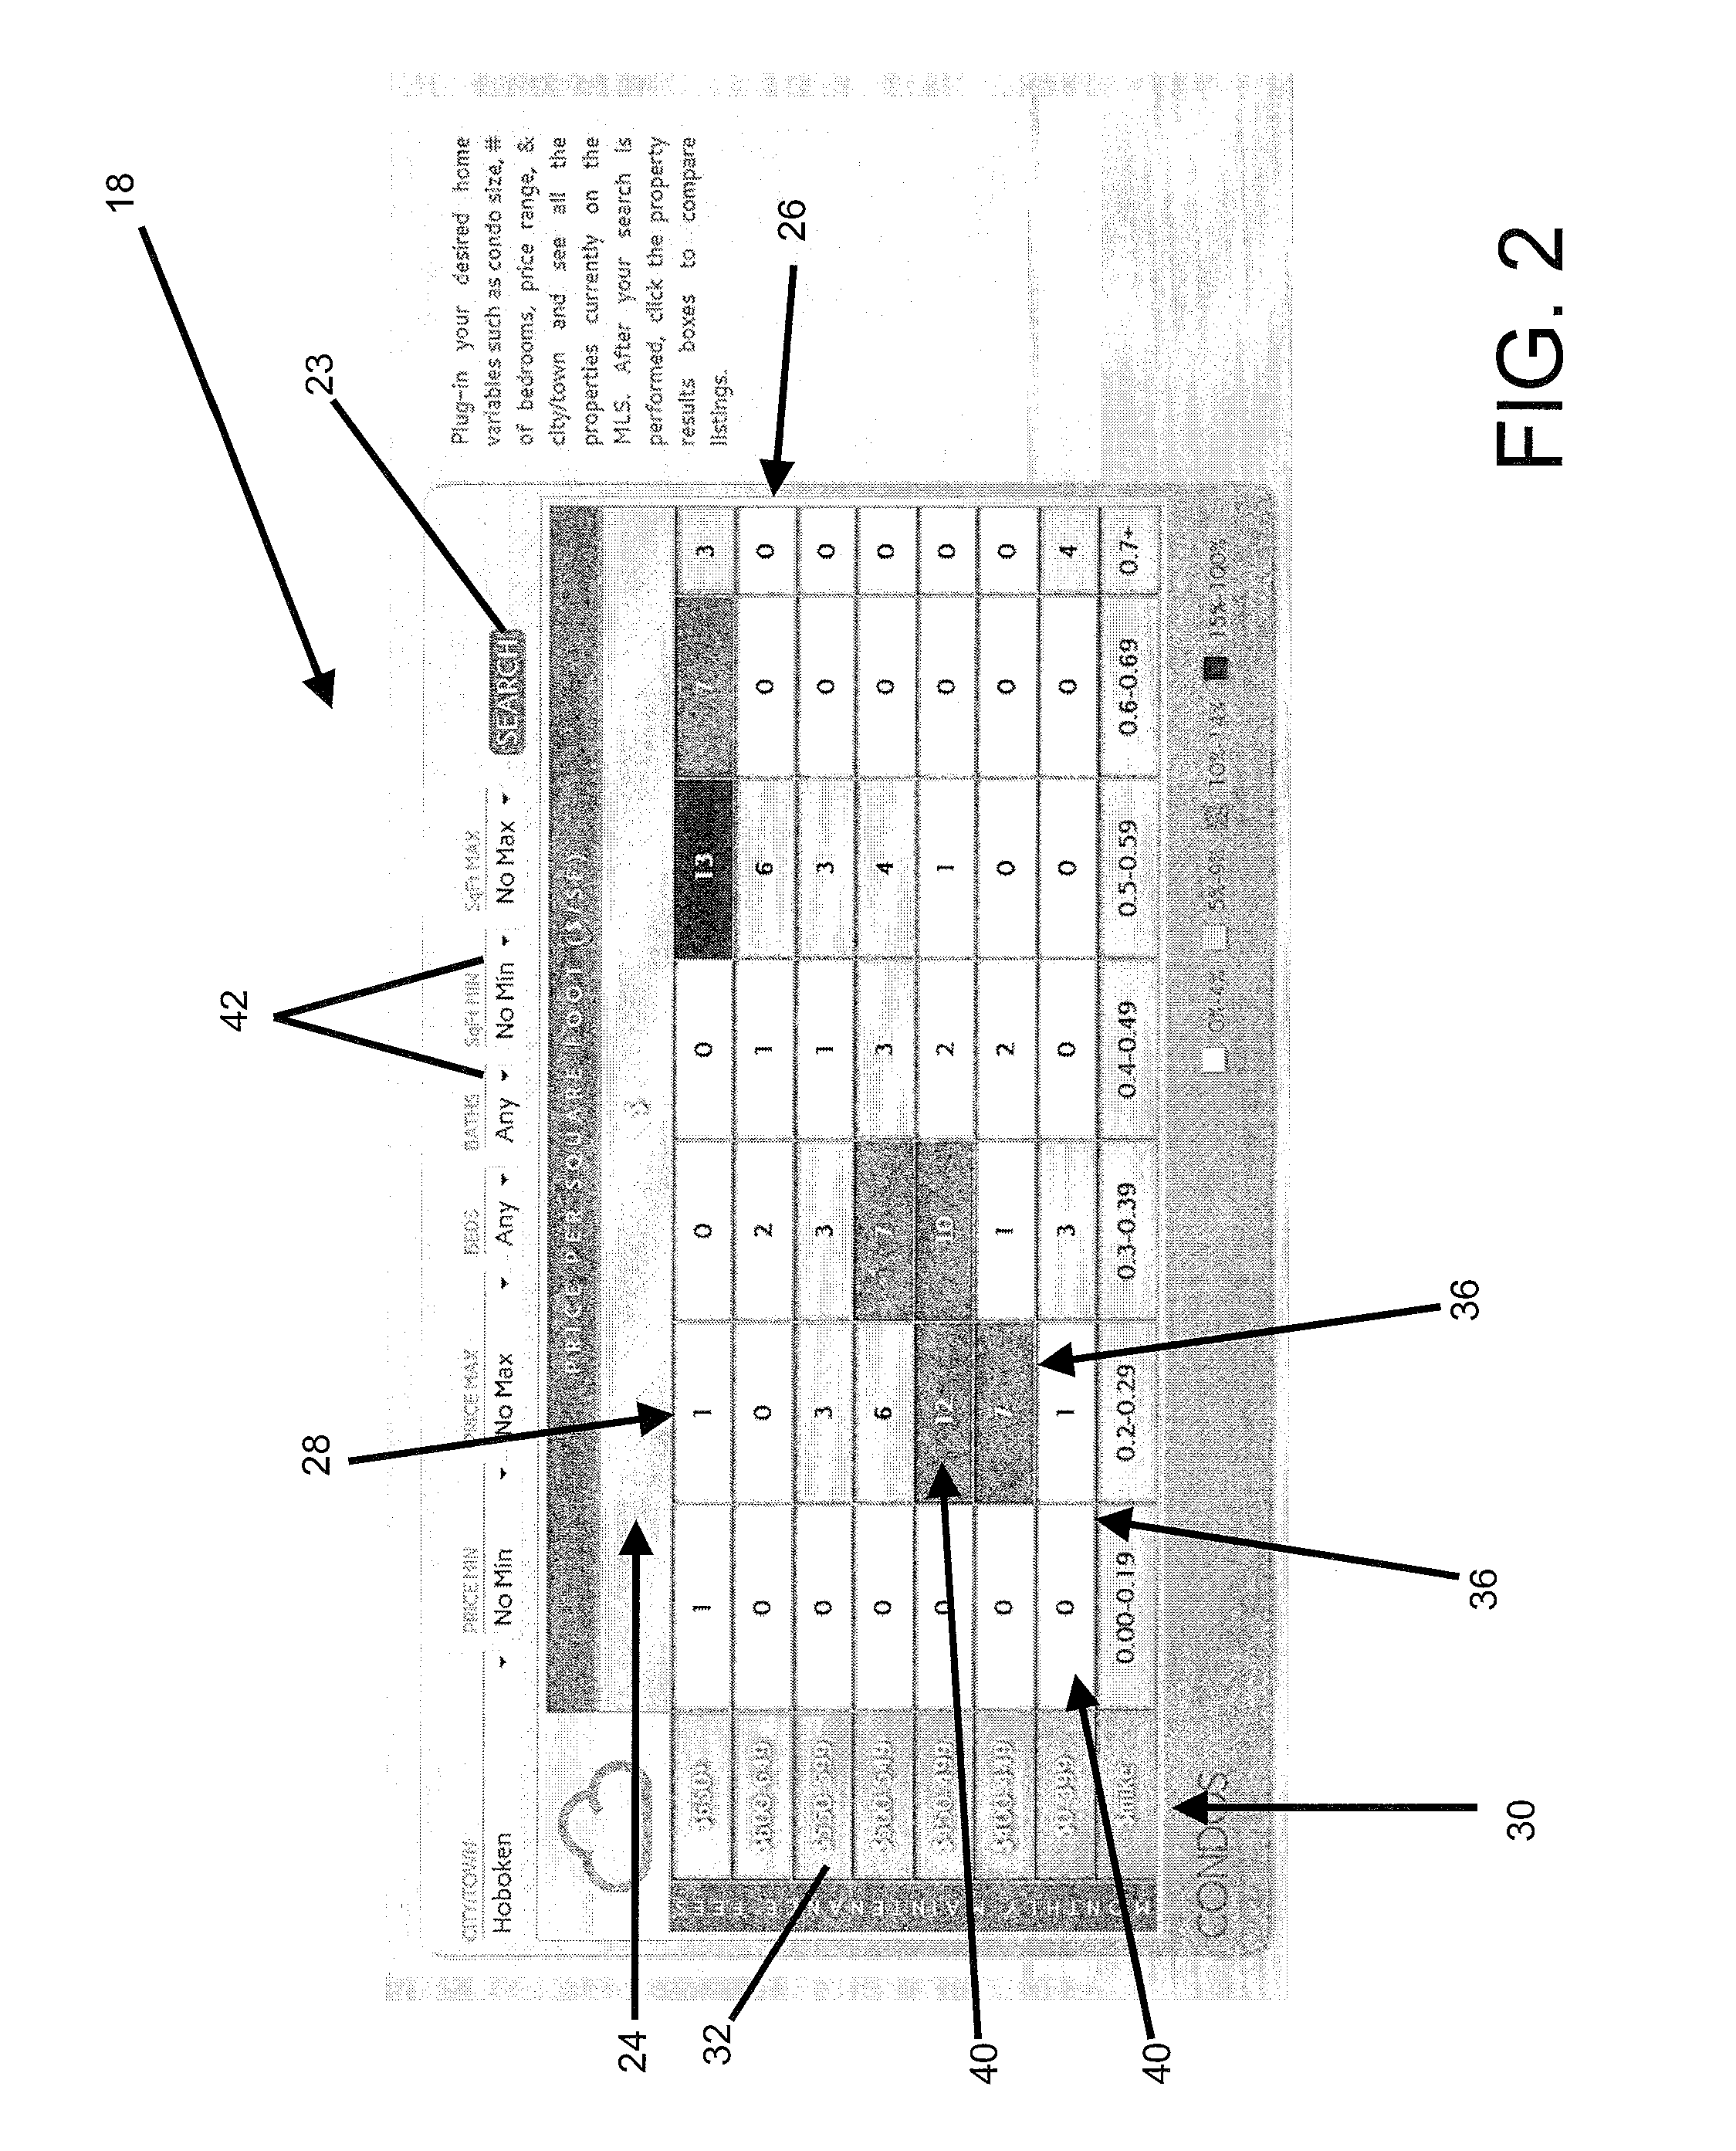 System and method for measuring and displaying residential real estate and property values